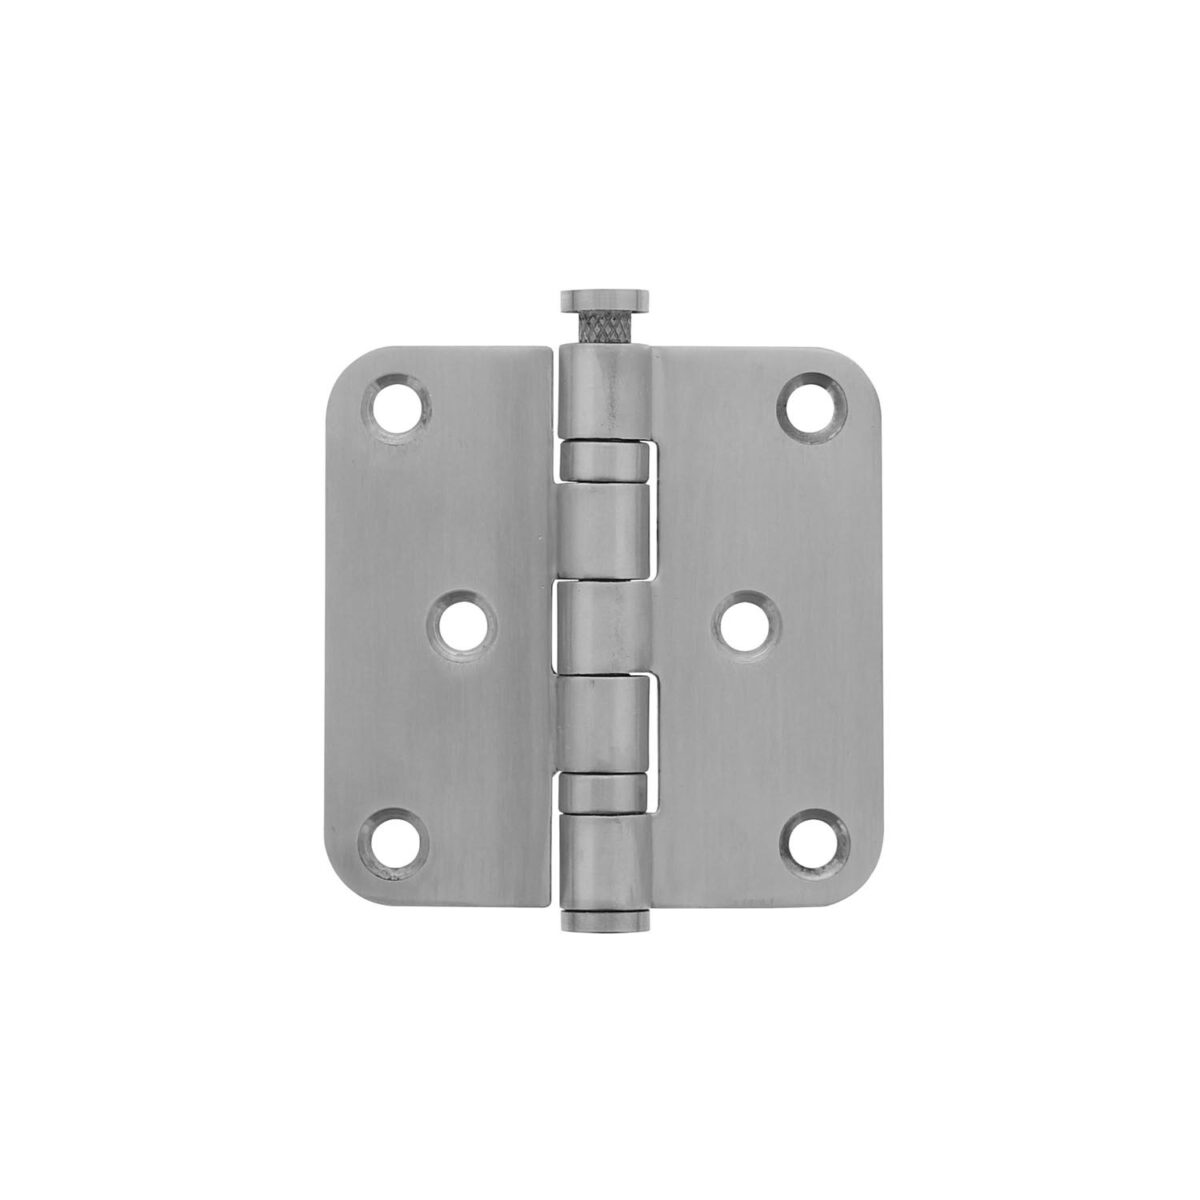 Ball bearing hinge 76 x 76 mm with round corner brushed stainless steel incl. screws